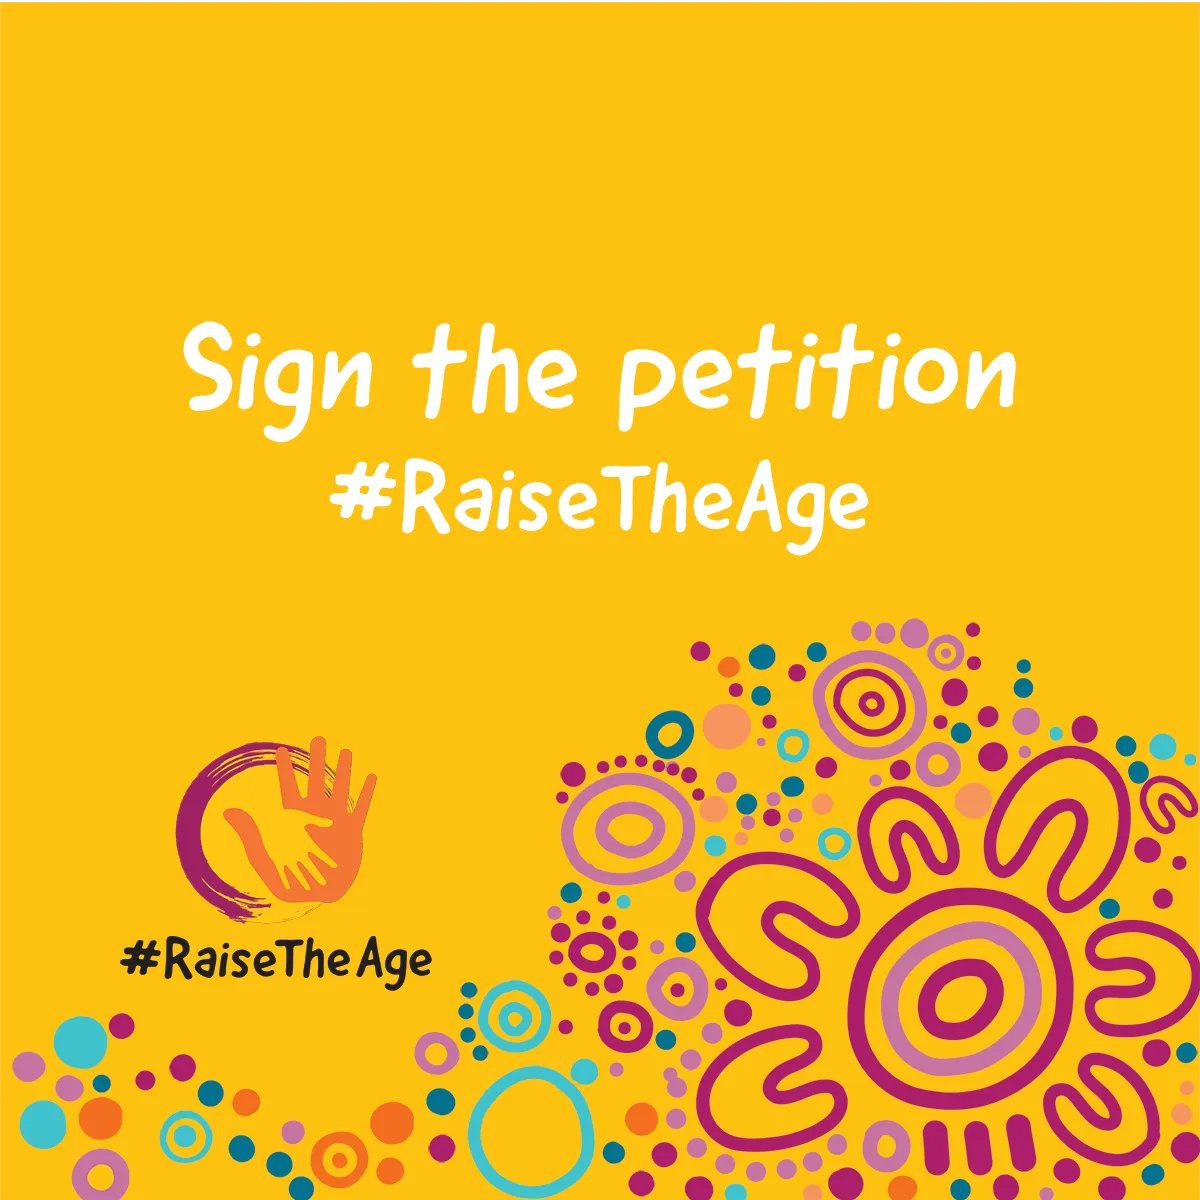 World Vision is a proud member of the Raise the Age Alliance